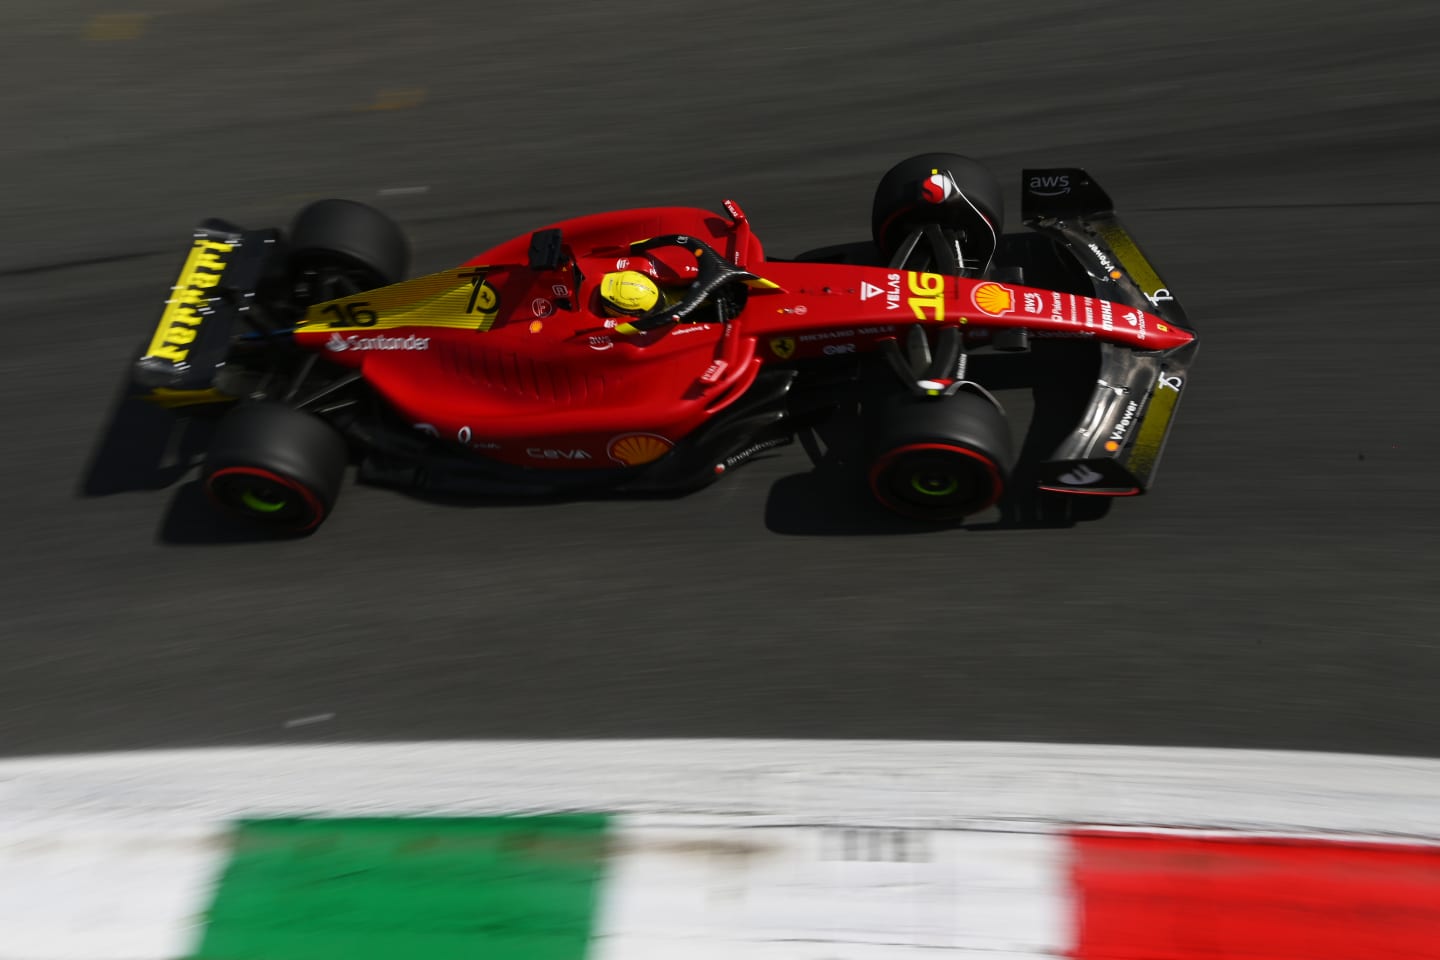 MONZA, ITALY - SEPTEMBER 09: Charles Leclerc of Monaco driving (16) the Ferrari F1-75 on track during practice ahead of the F1 Grand Prix of Italy at Autodromo Nazionale Monza on September 09, 2022 in Monza, Italy. (Photo by Dan Mullan/Getty Images)